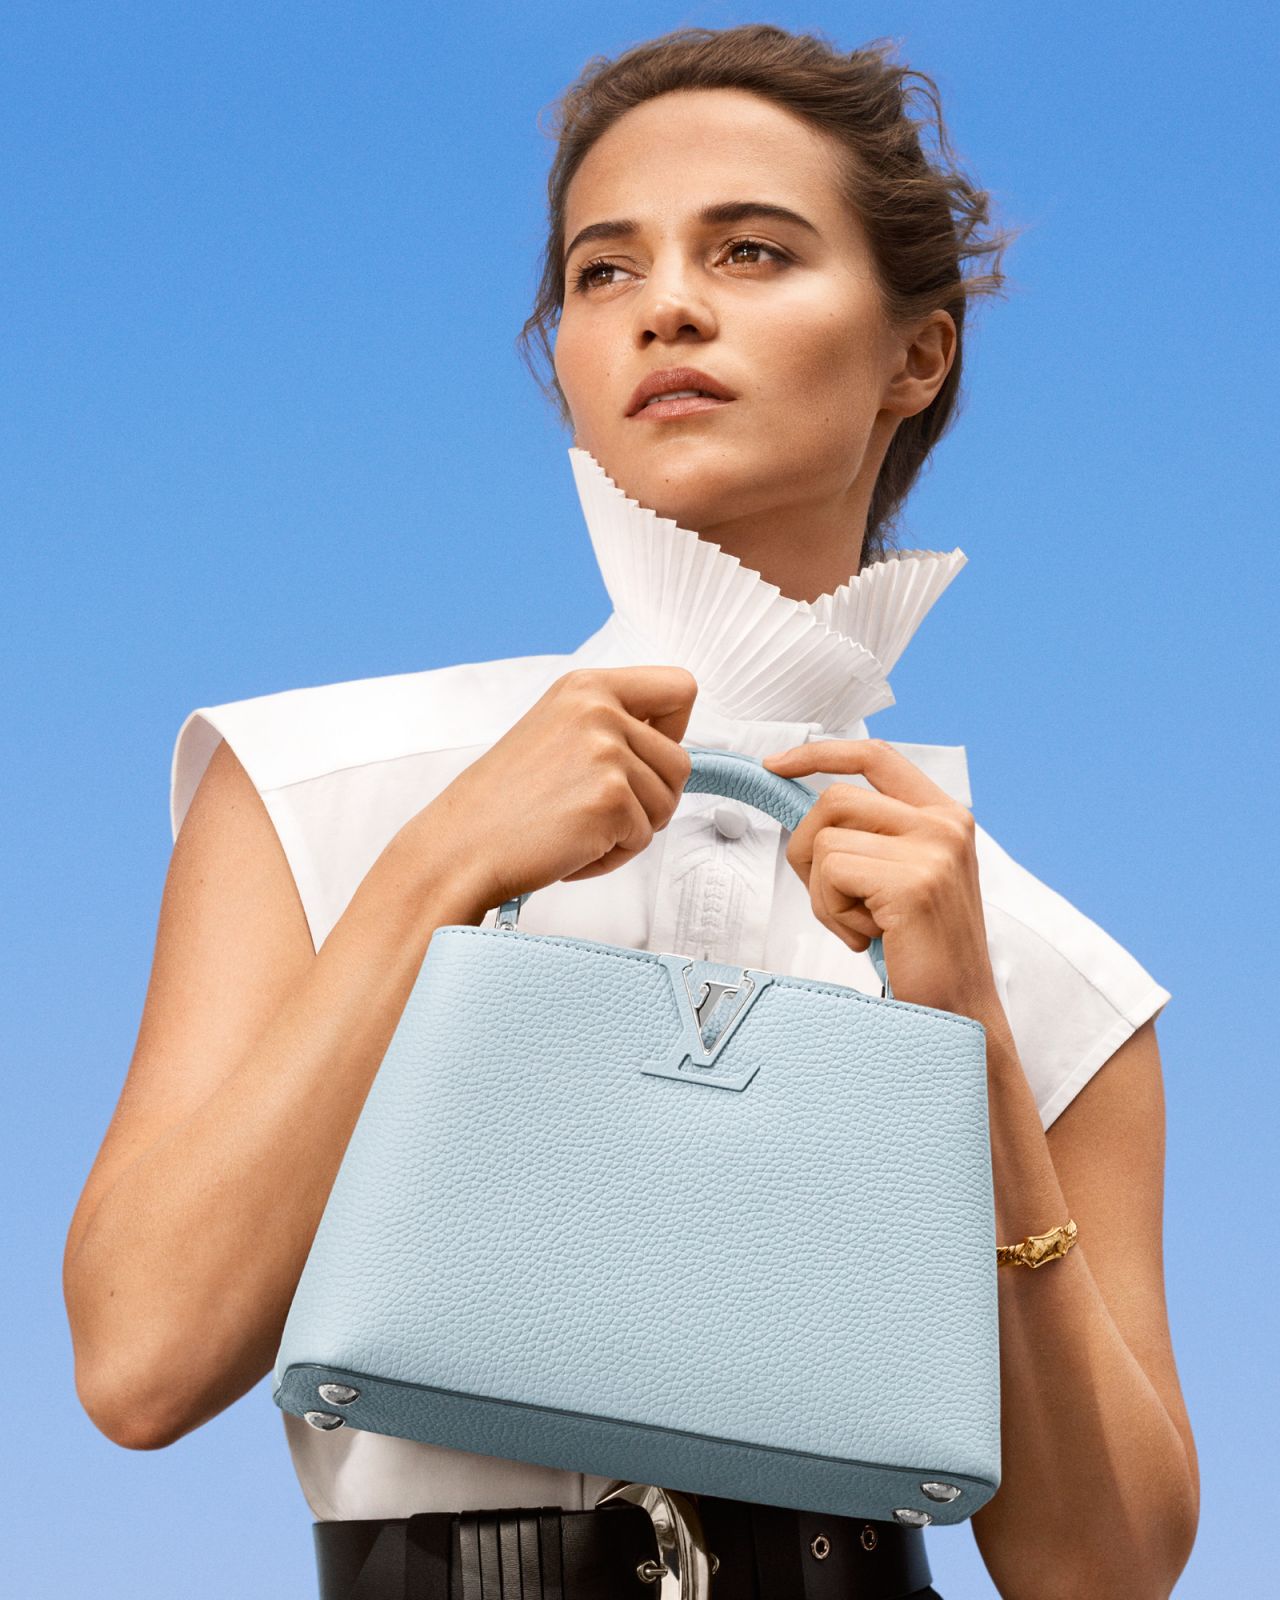 Holidays 2020: Louis Vuitton Goes on Journey Home with Alicia Vikander